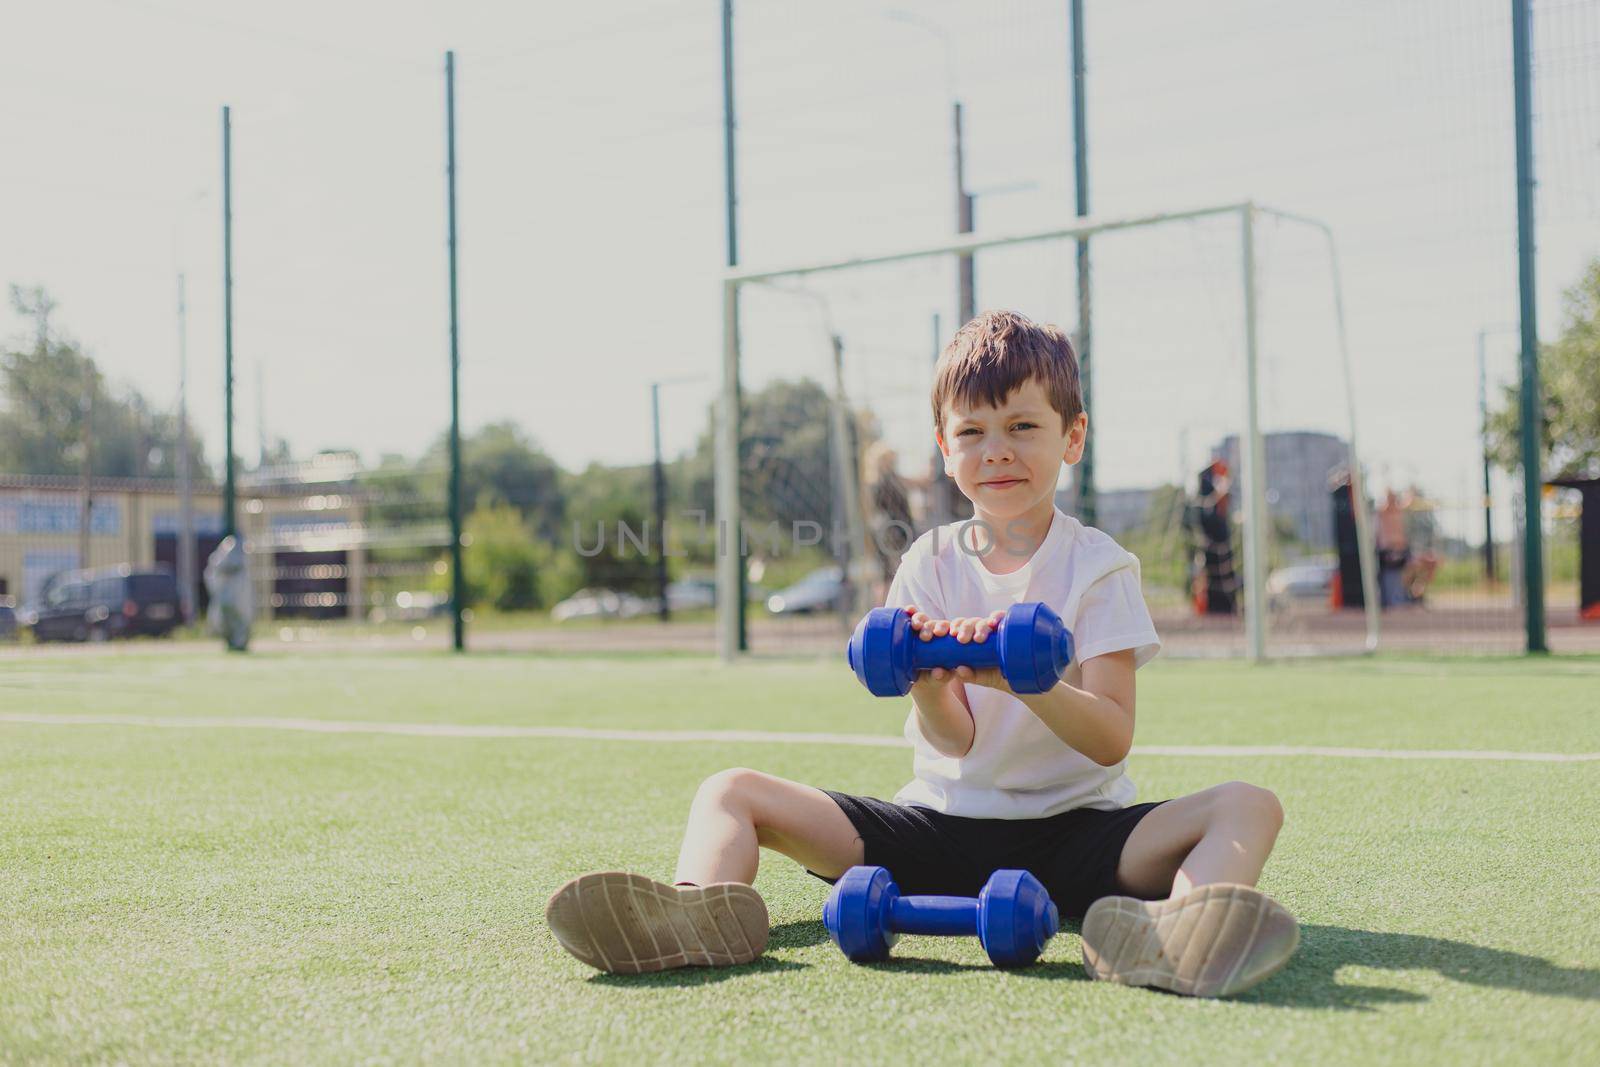 A child with dumbbells on the playground. A sporty kid. Illustrating an article about sports. Children's exercises. Education of champions. Light weightlifting. Lifestyle